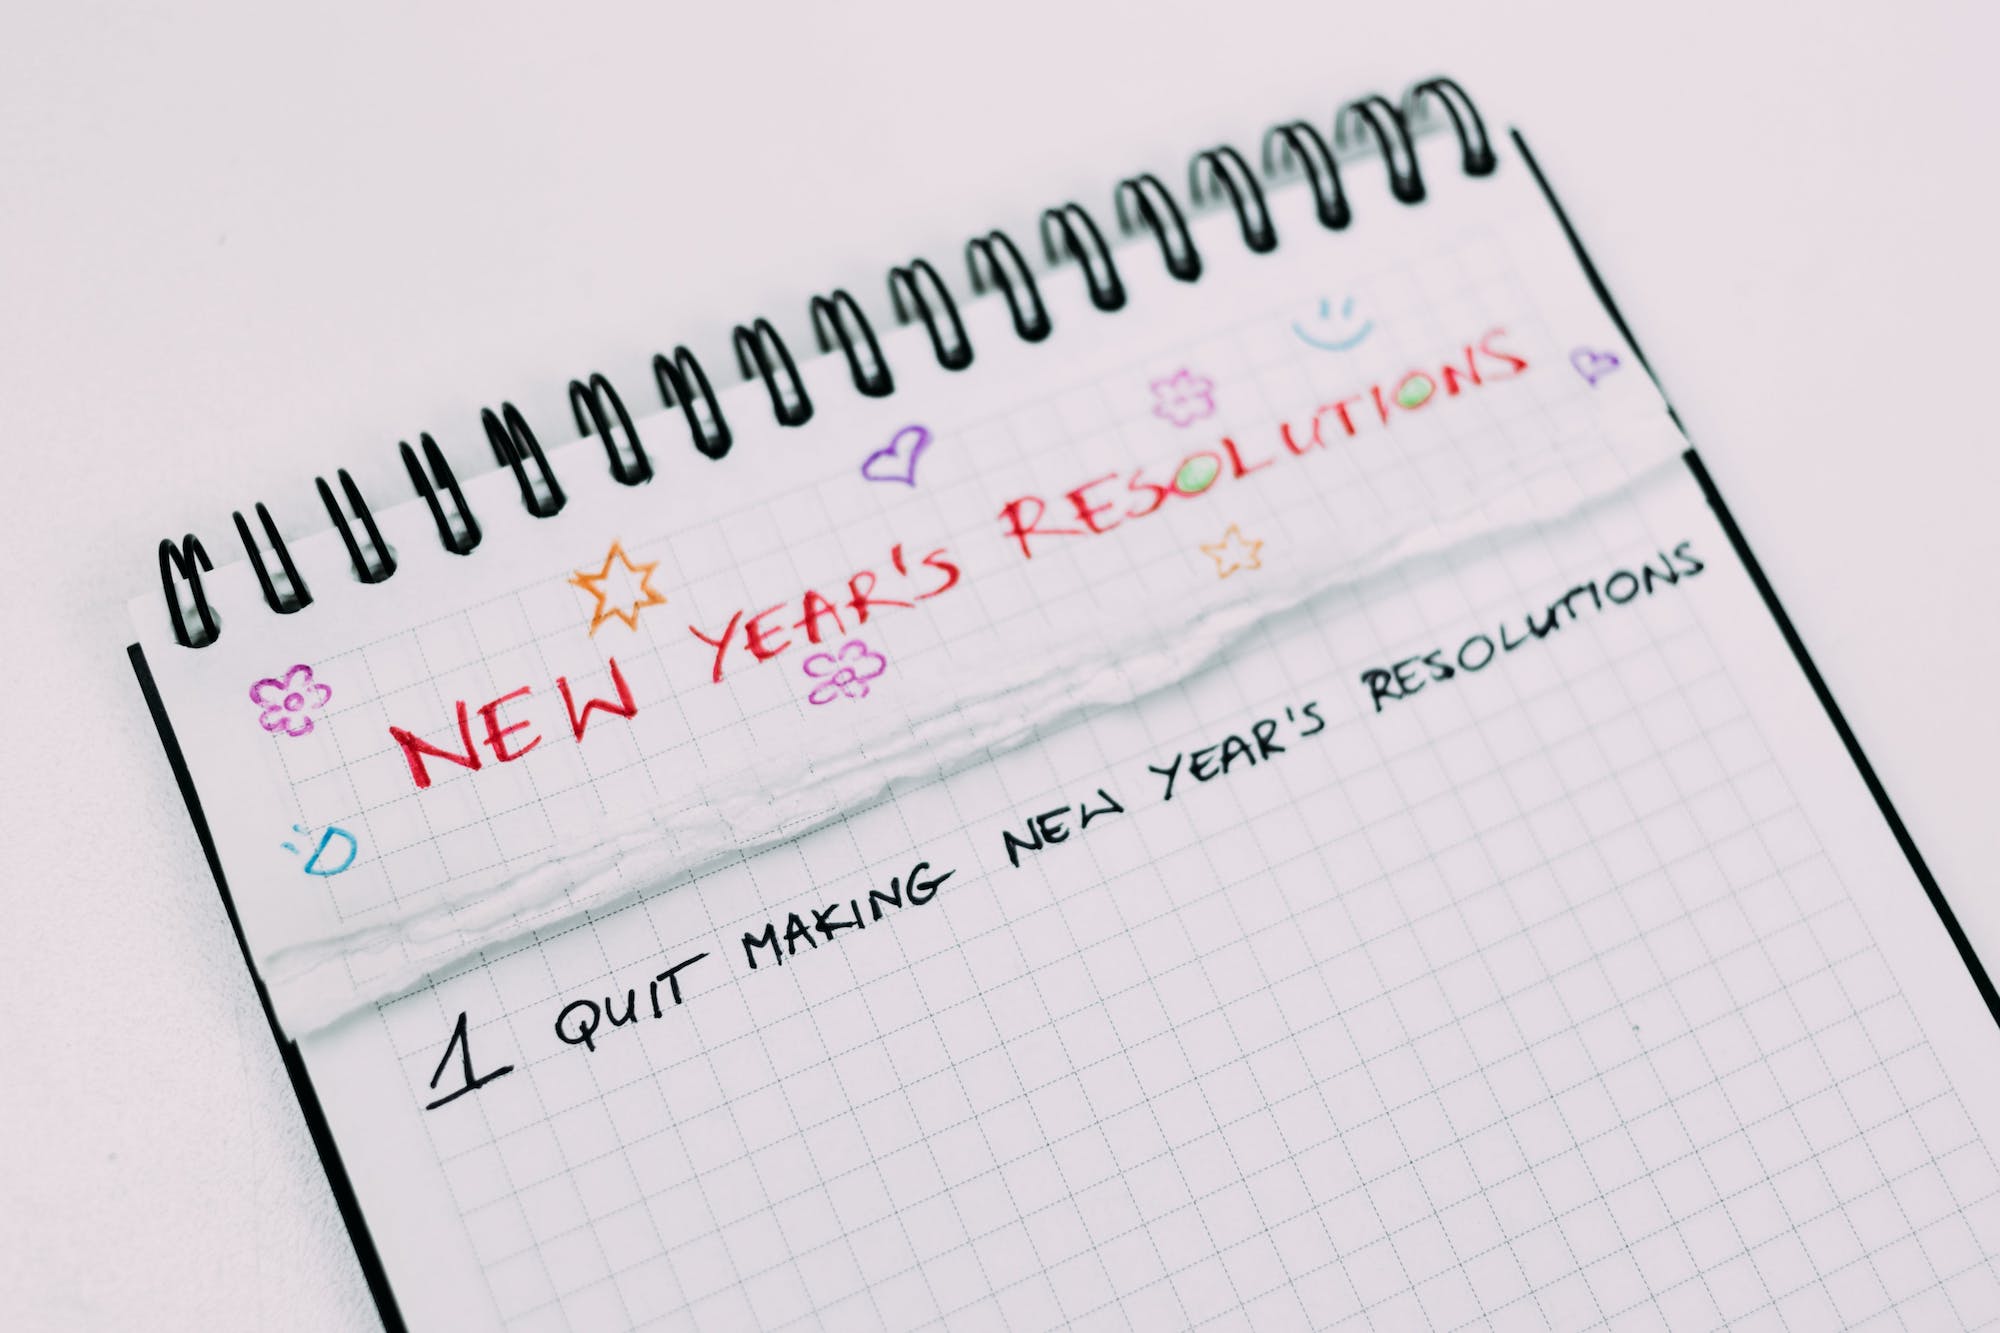 A Unique New Year's Resolution